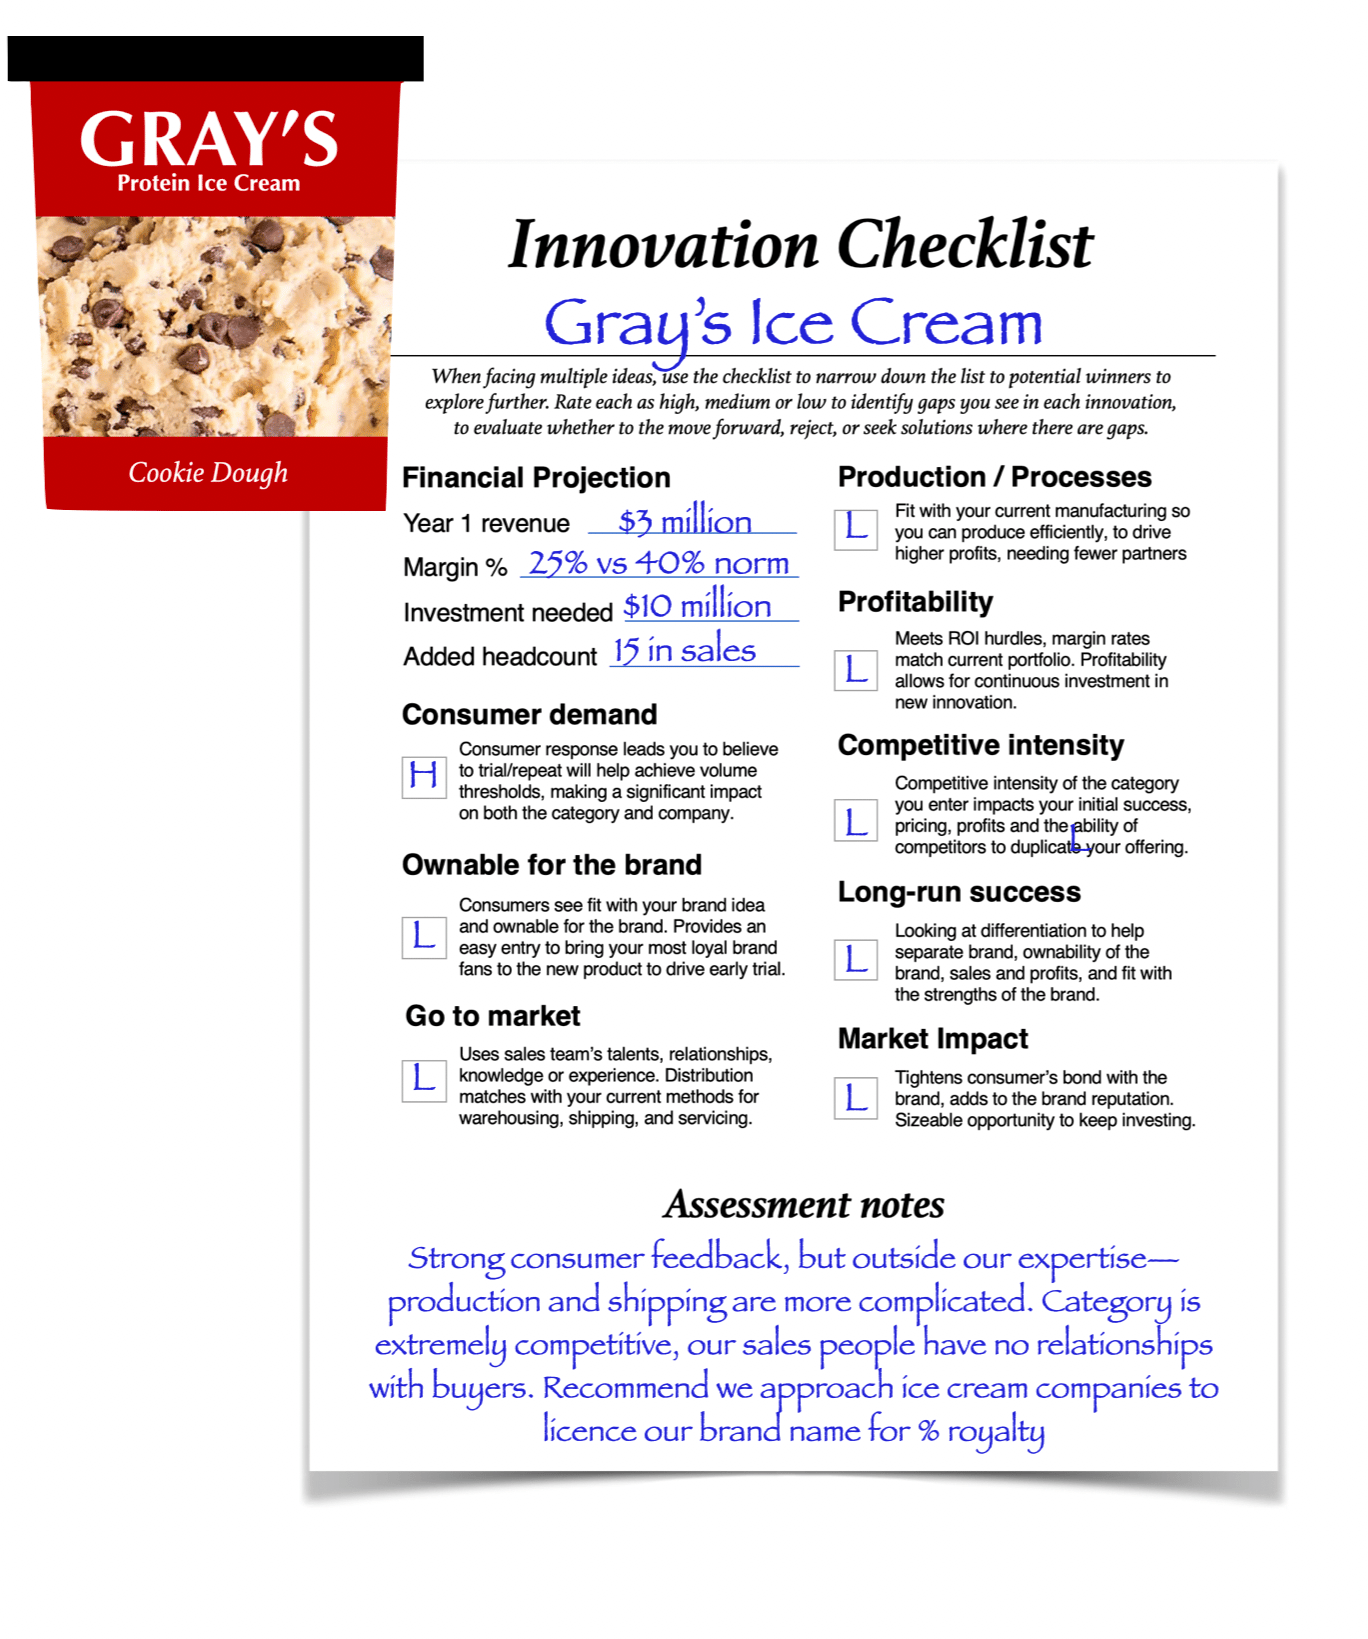 Innovation Process Innovation Checklist developing product strategy